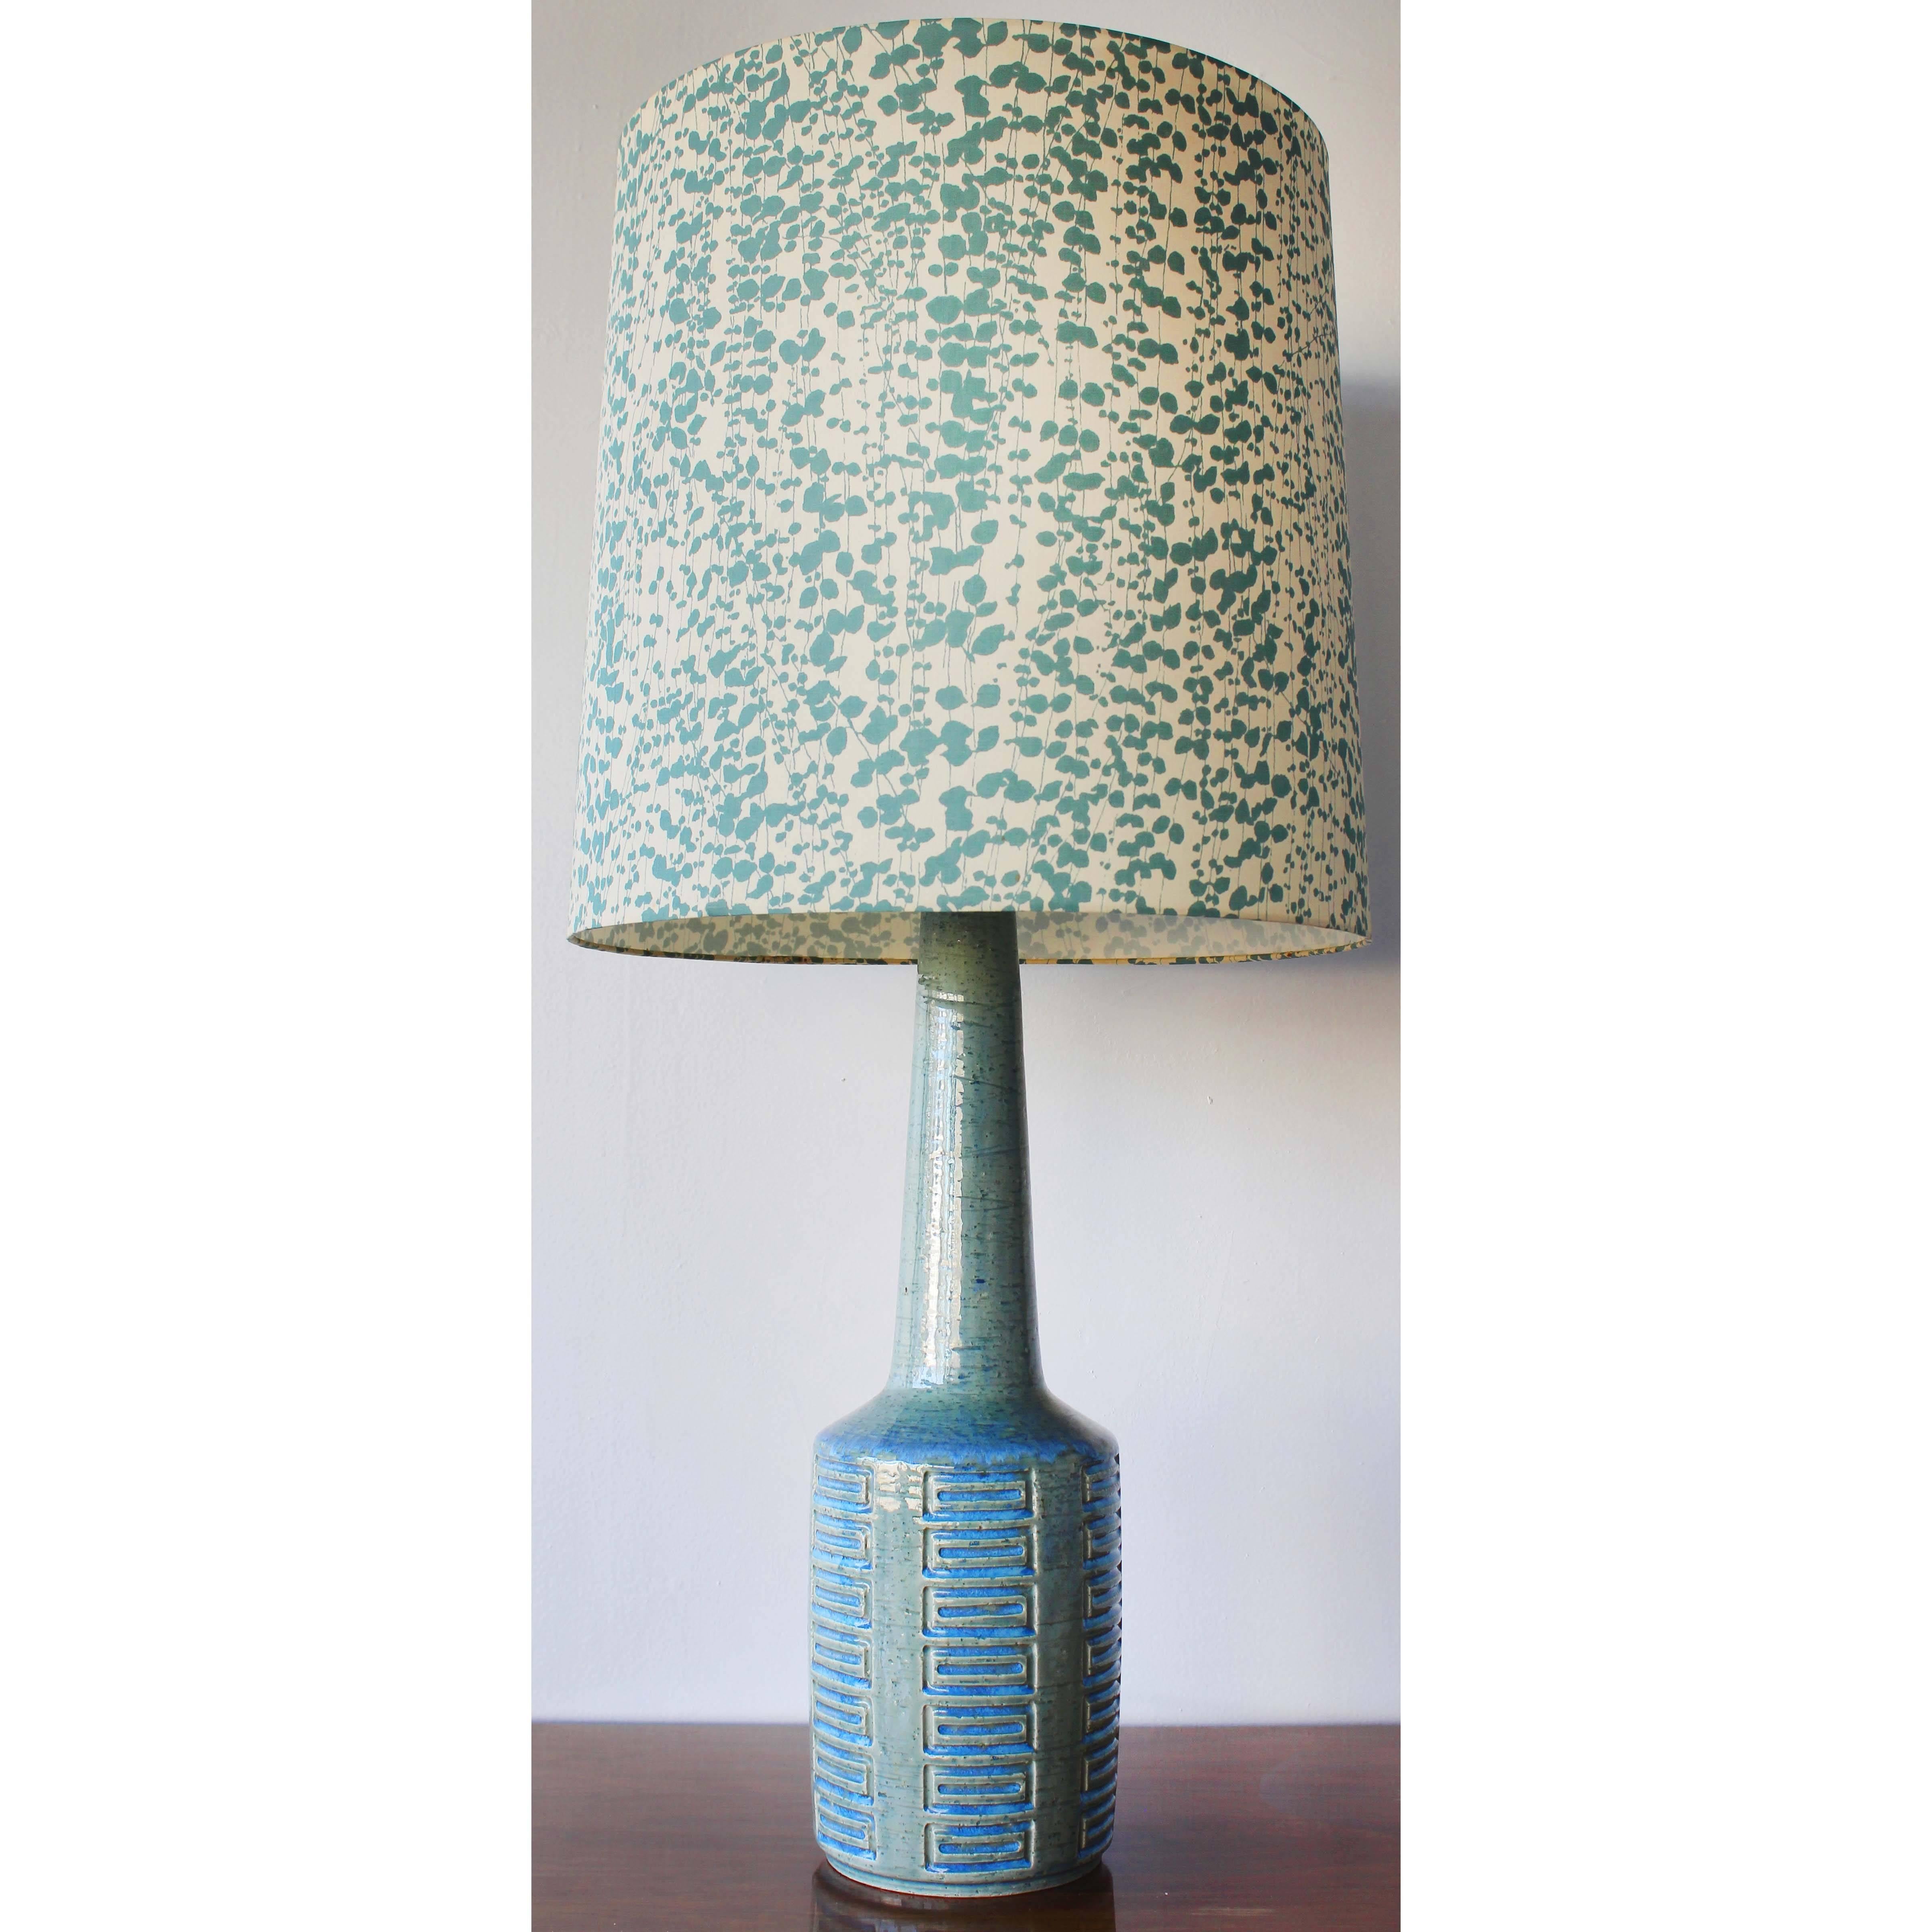 Striking, long neck ceramic glazed table lamp designed by Per Linnemann-Schmidt for Palshus, Denmark, 1960s.
Height to socket is 24 inches.

Price is with or without shade included.
shade is 16 in diameter x 16 in high.